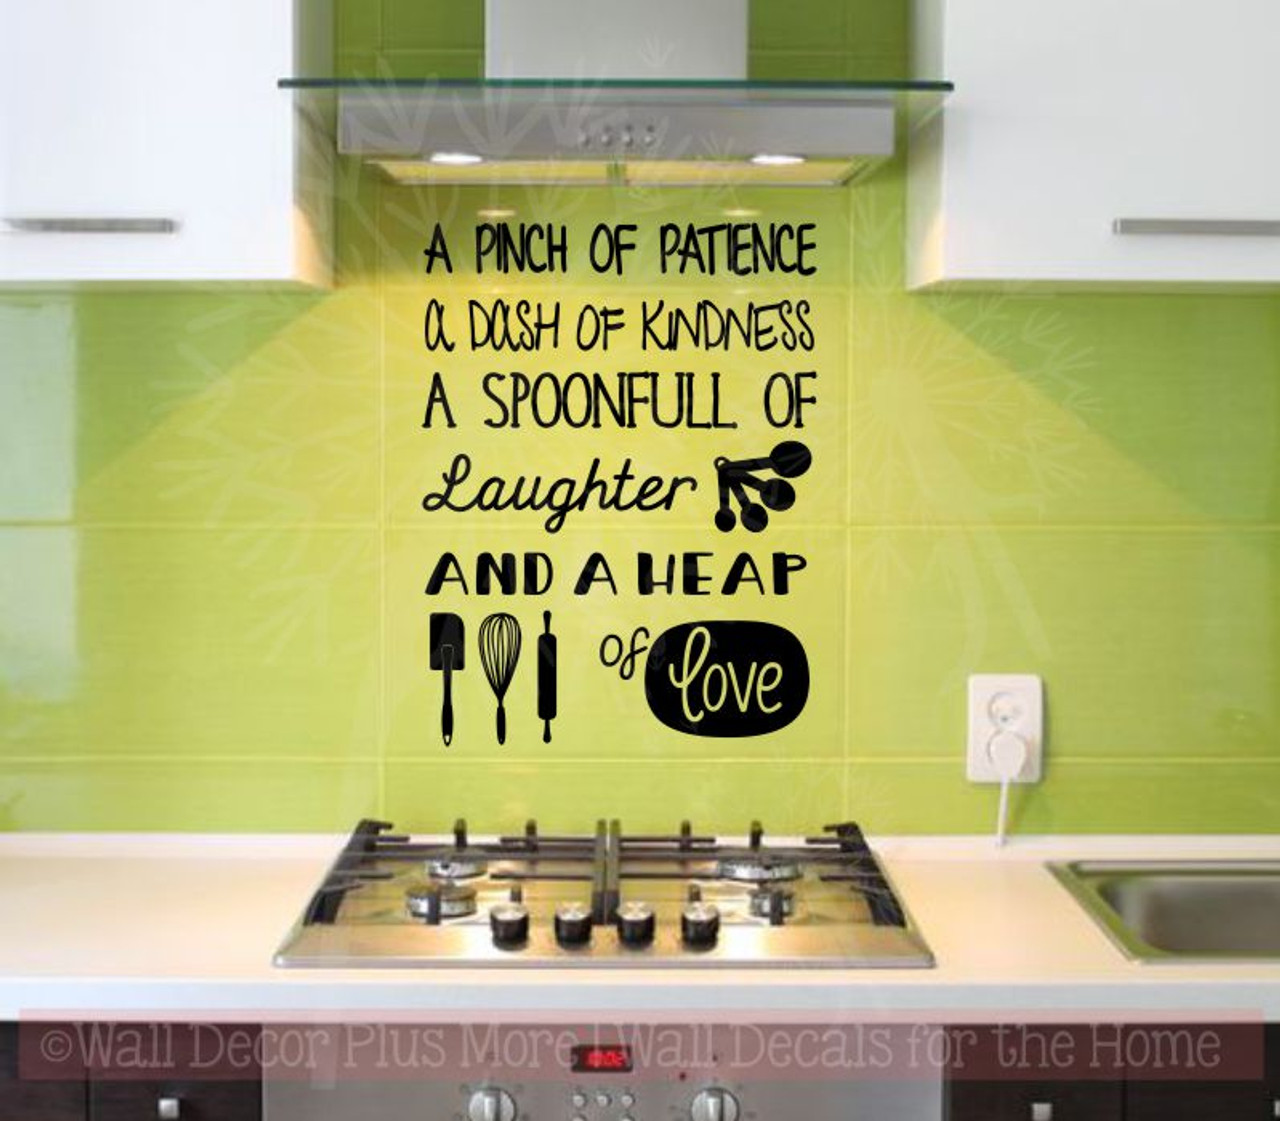 A Pinch Of Patience Sticker For Kitchen - Inspirational Wall